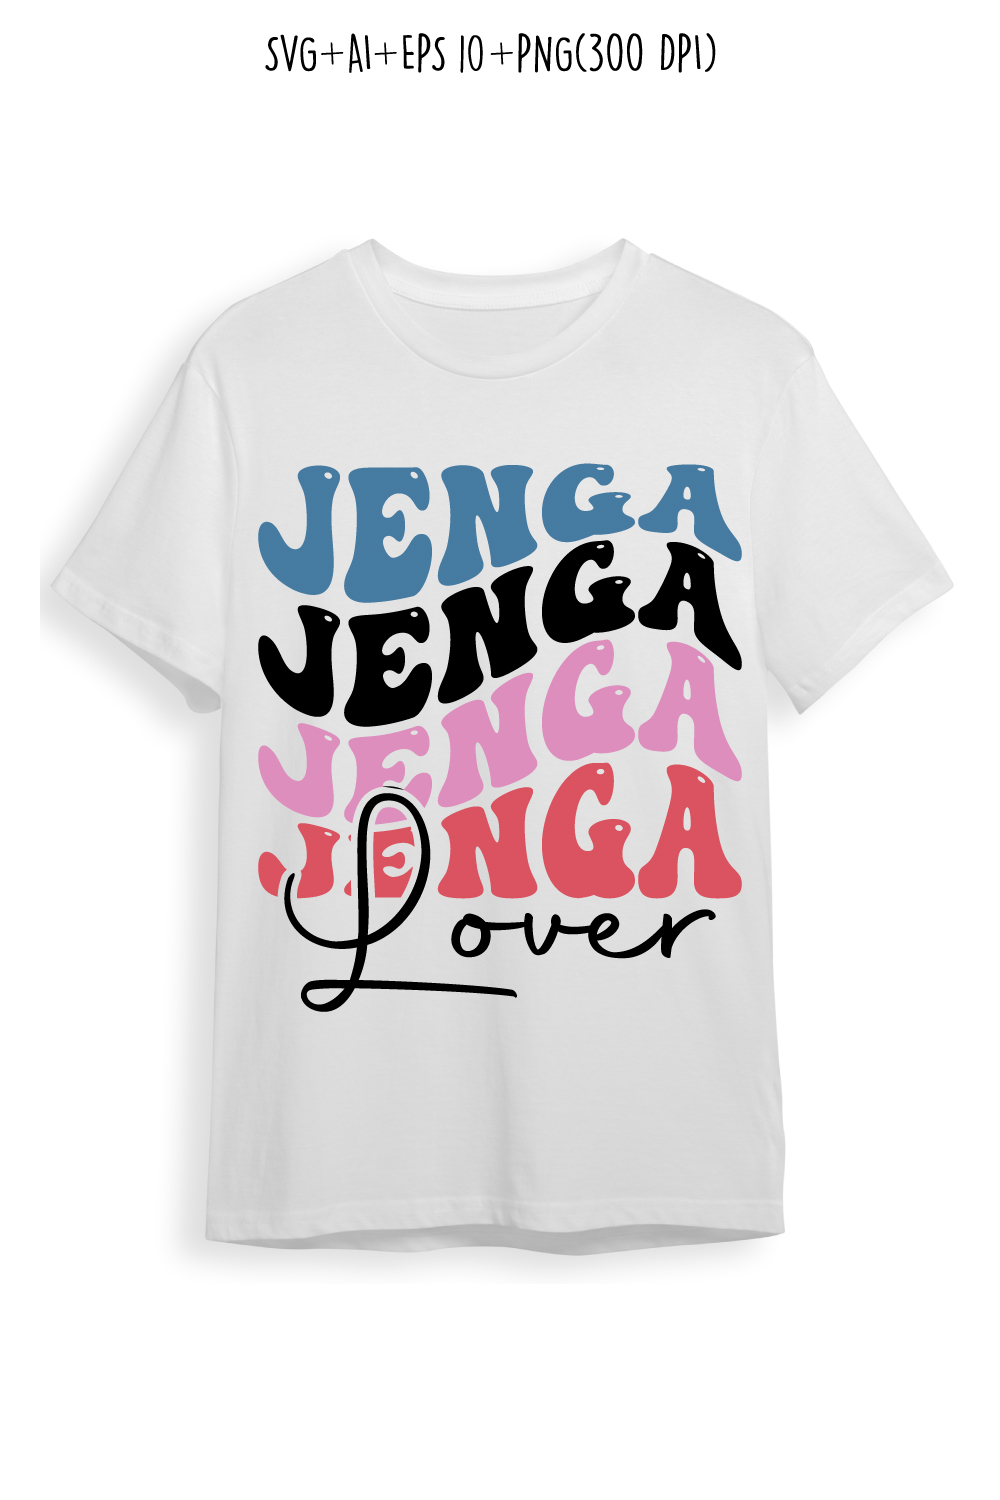 Jenga lover indoor game typography design for t-shirts, cards, frame artwork, phone cases, bags, mugs, stickers, tumblers, print, etc pinterest preview image.